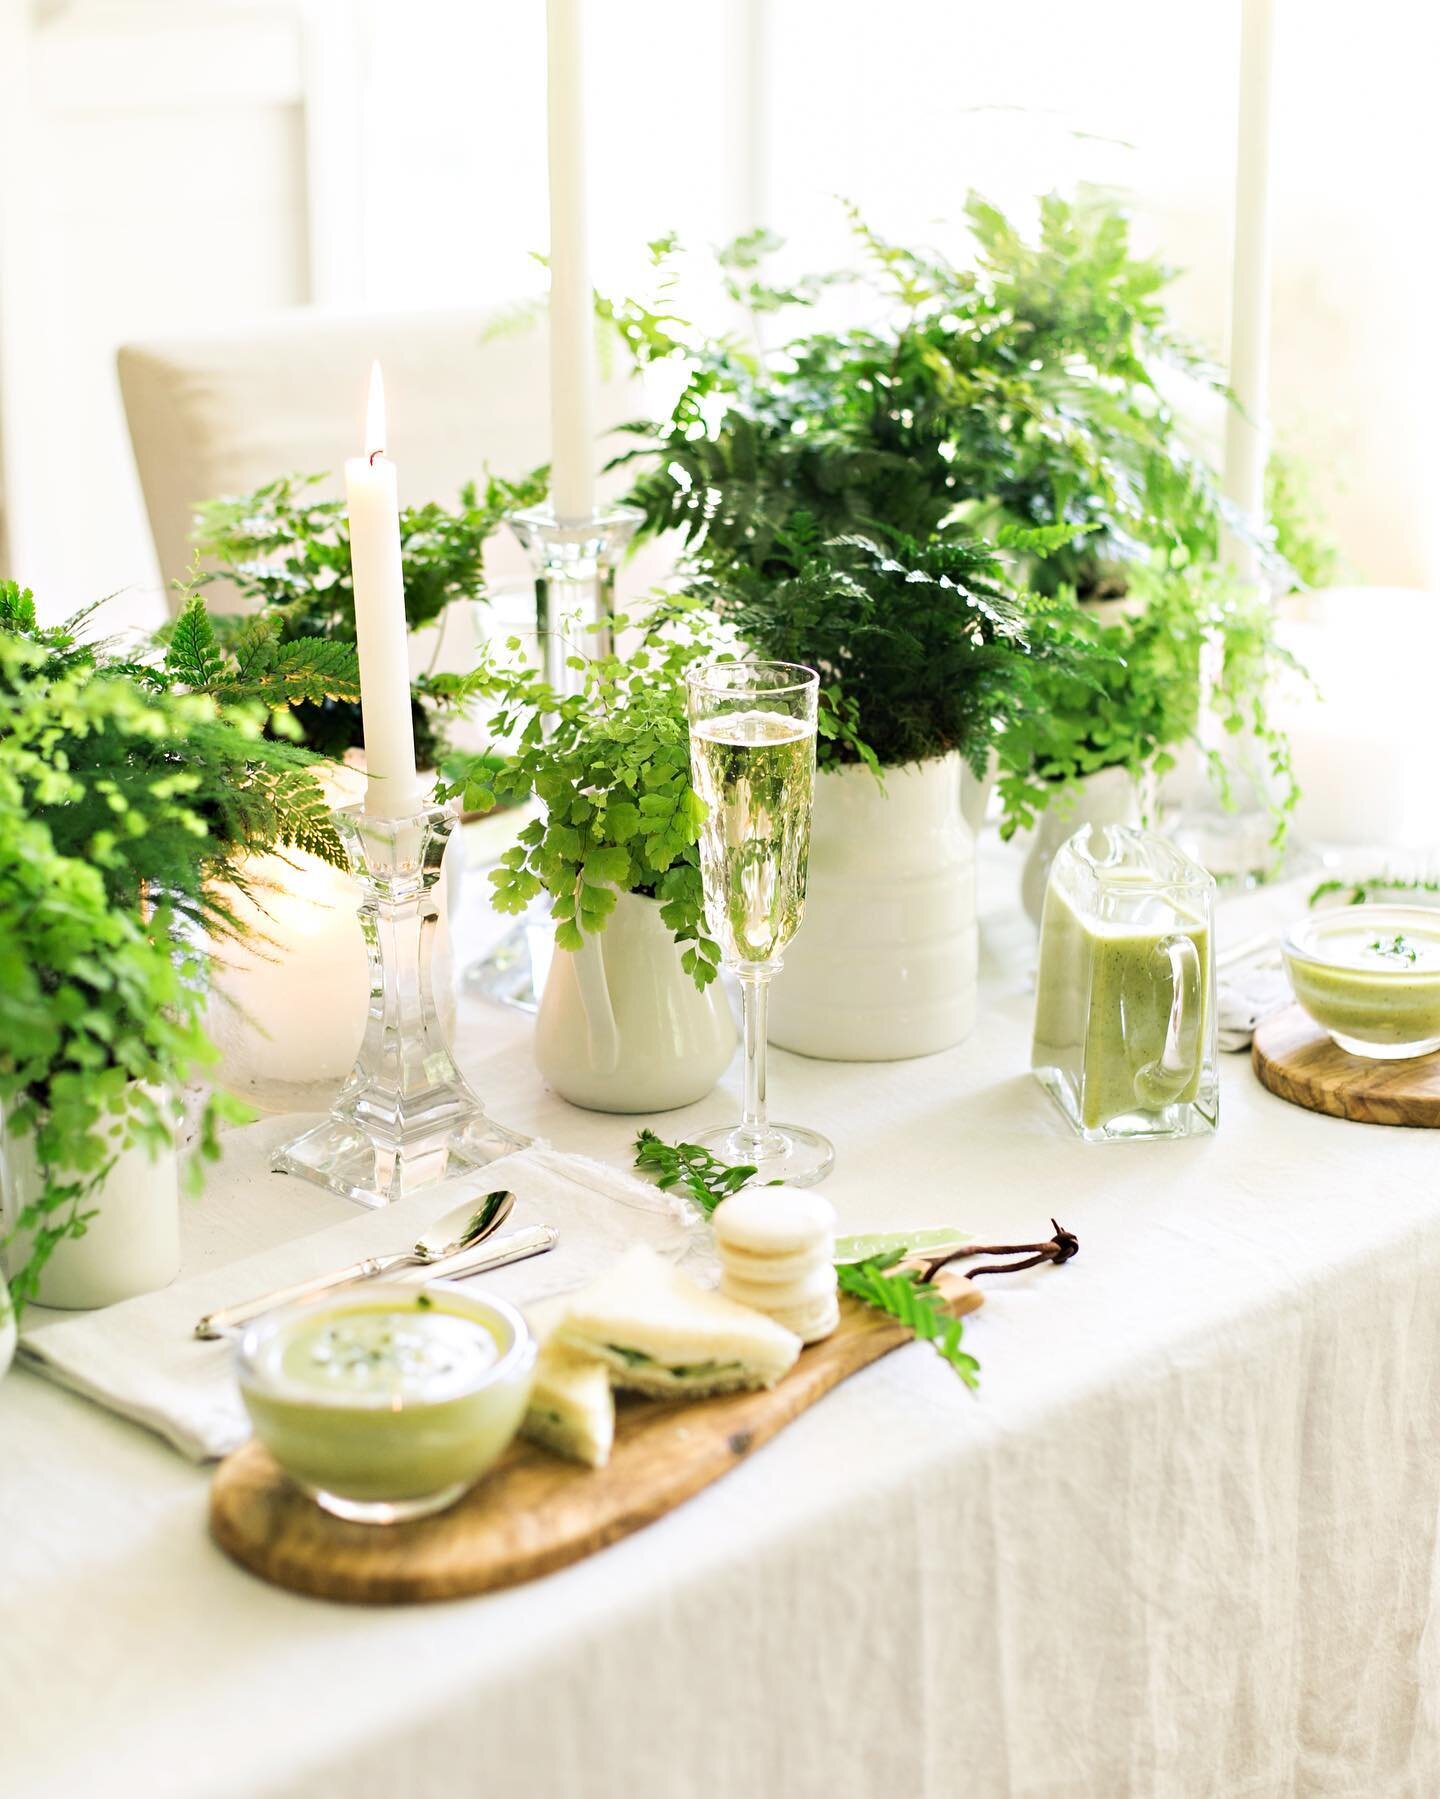 Cheers to the first day of spring. 🌿Here&rsquo;s to lighter and brighter days ahead! 

#firstdayofspring #springtable #stylingmyeveryday #springtablescape #ferncenterpiece Photos by @amynicolephoto for #somuchtocelebratebook